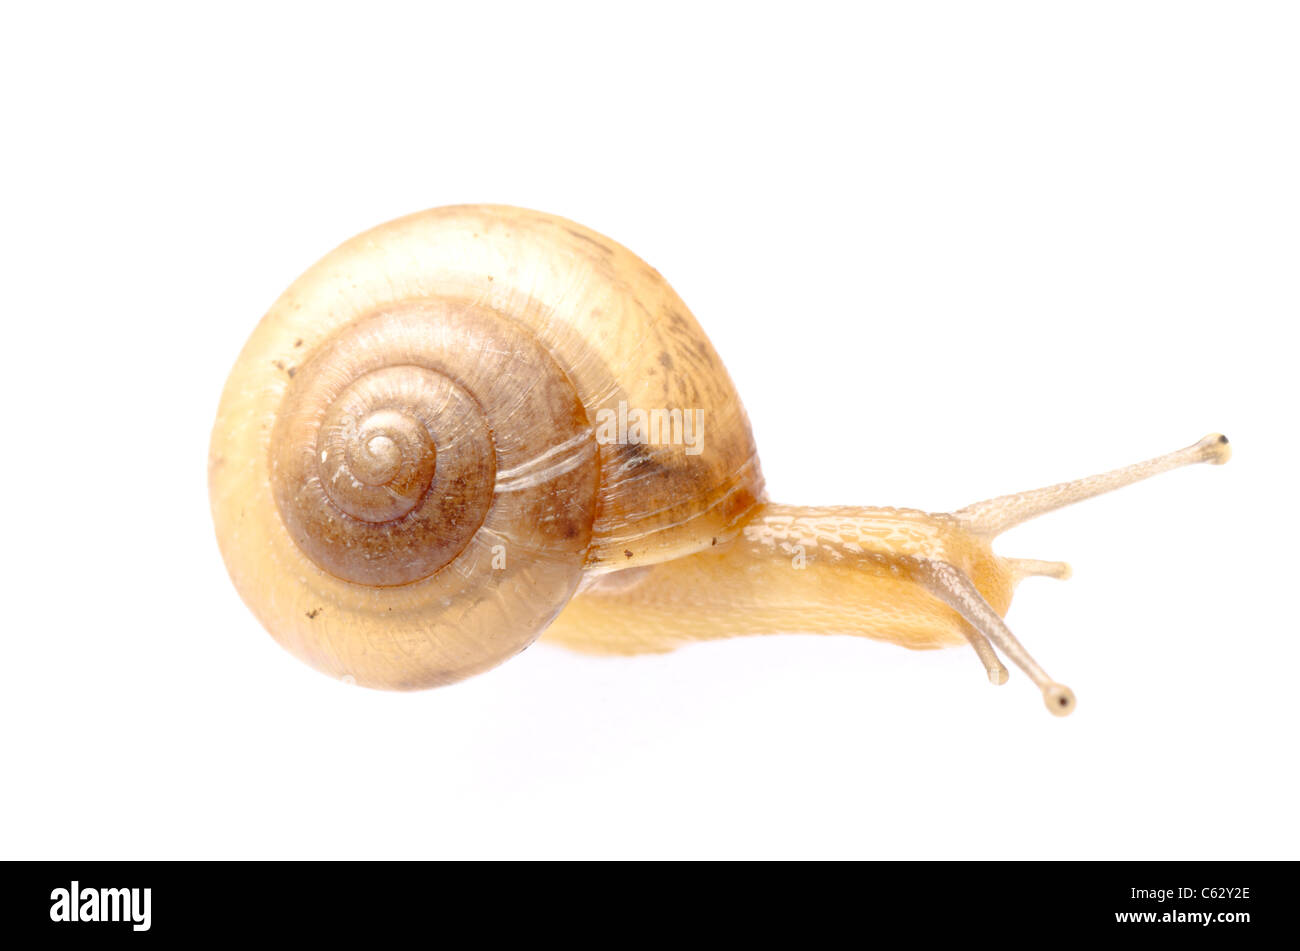 greden snail isolated on white background Stock Photo